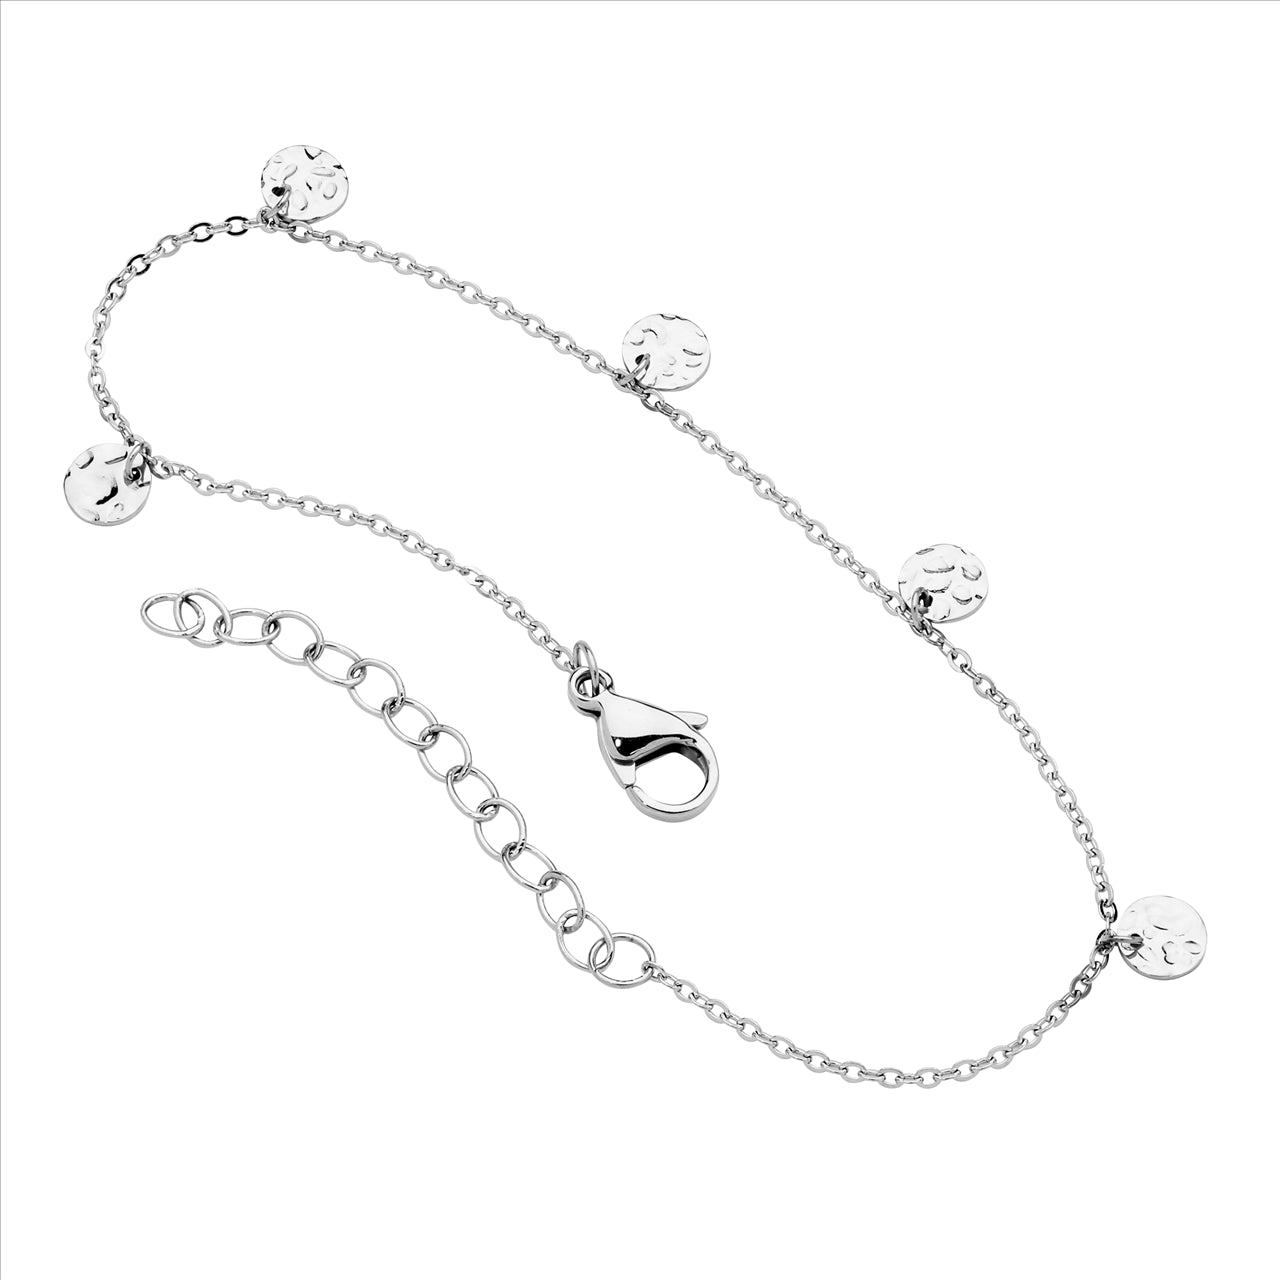 Stainless Steel Disk Feature Bracelet